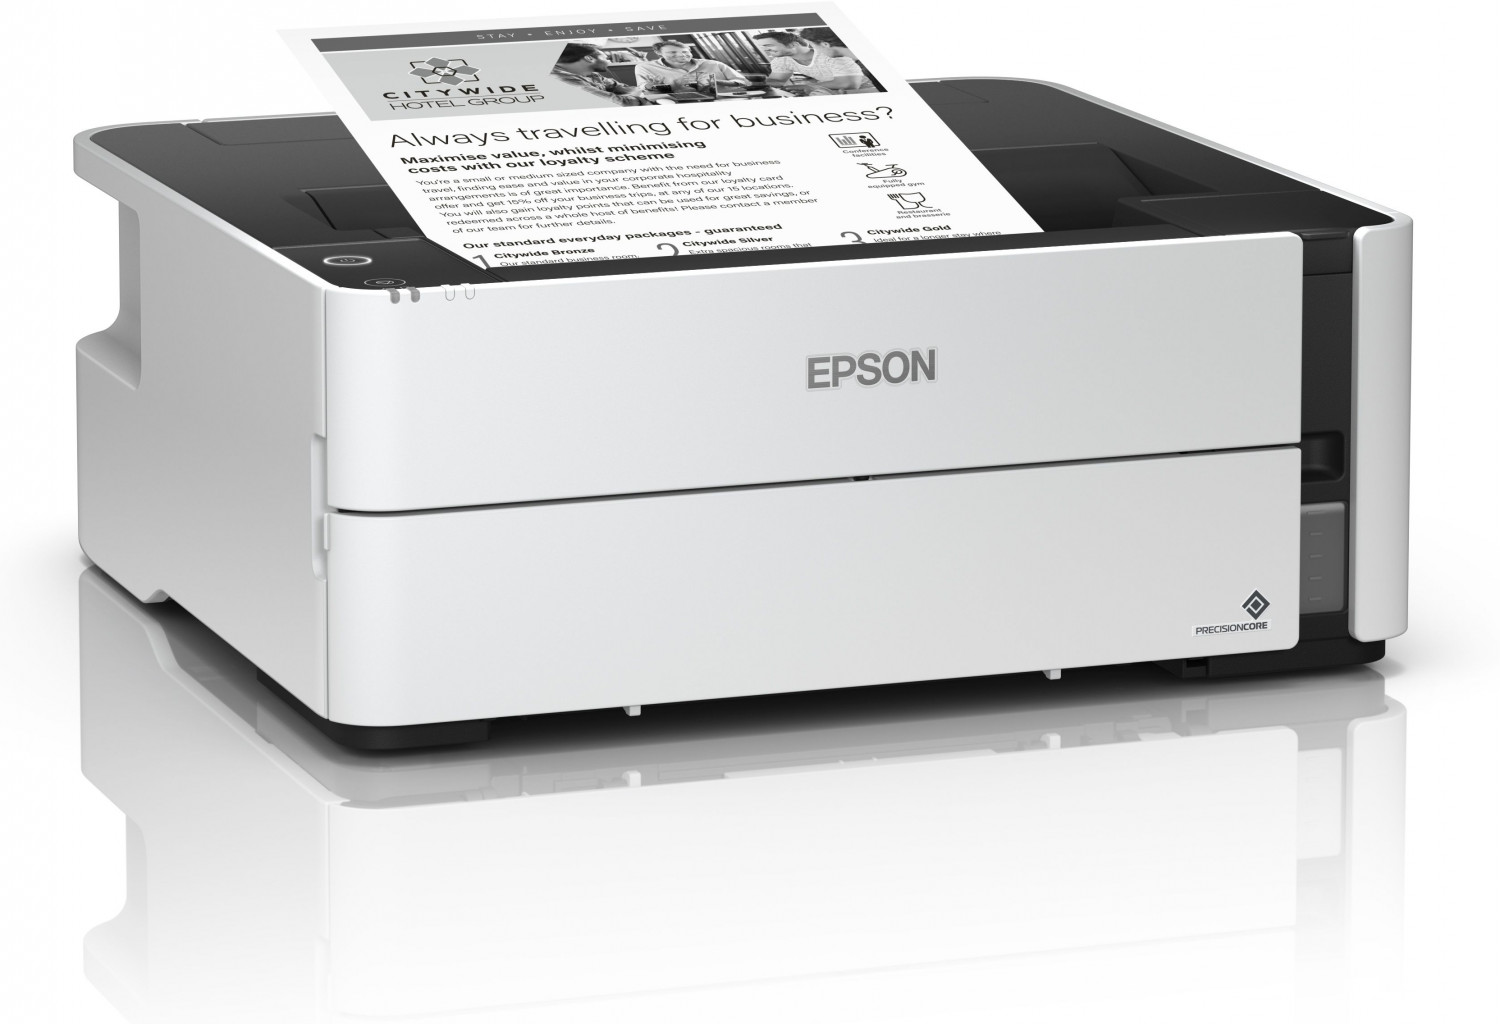 Step-by-step Driver Epson Printer ET-M1170 Installation in Ubuntu 22.04 - Featured